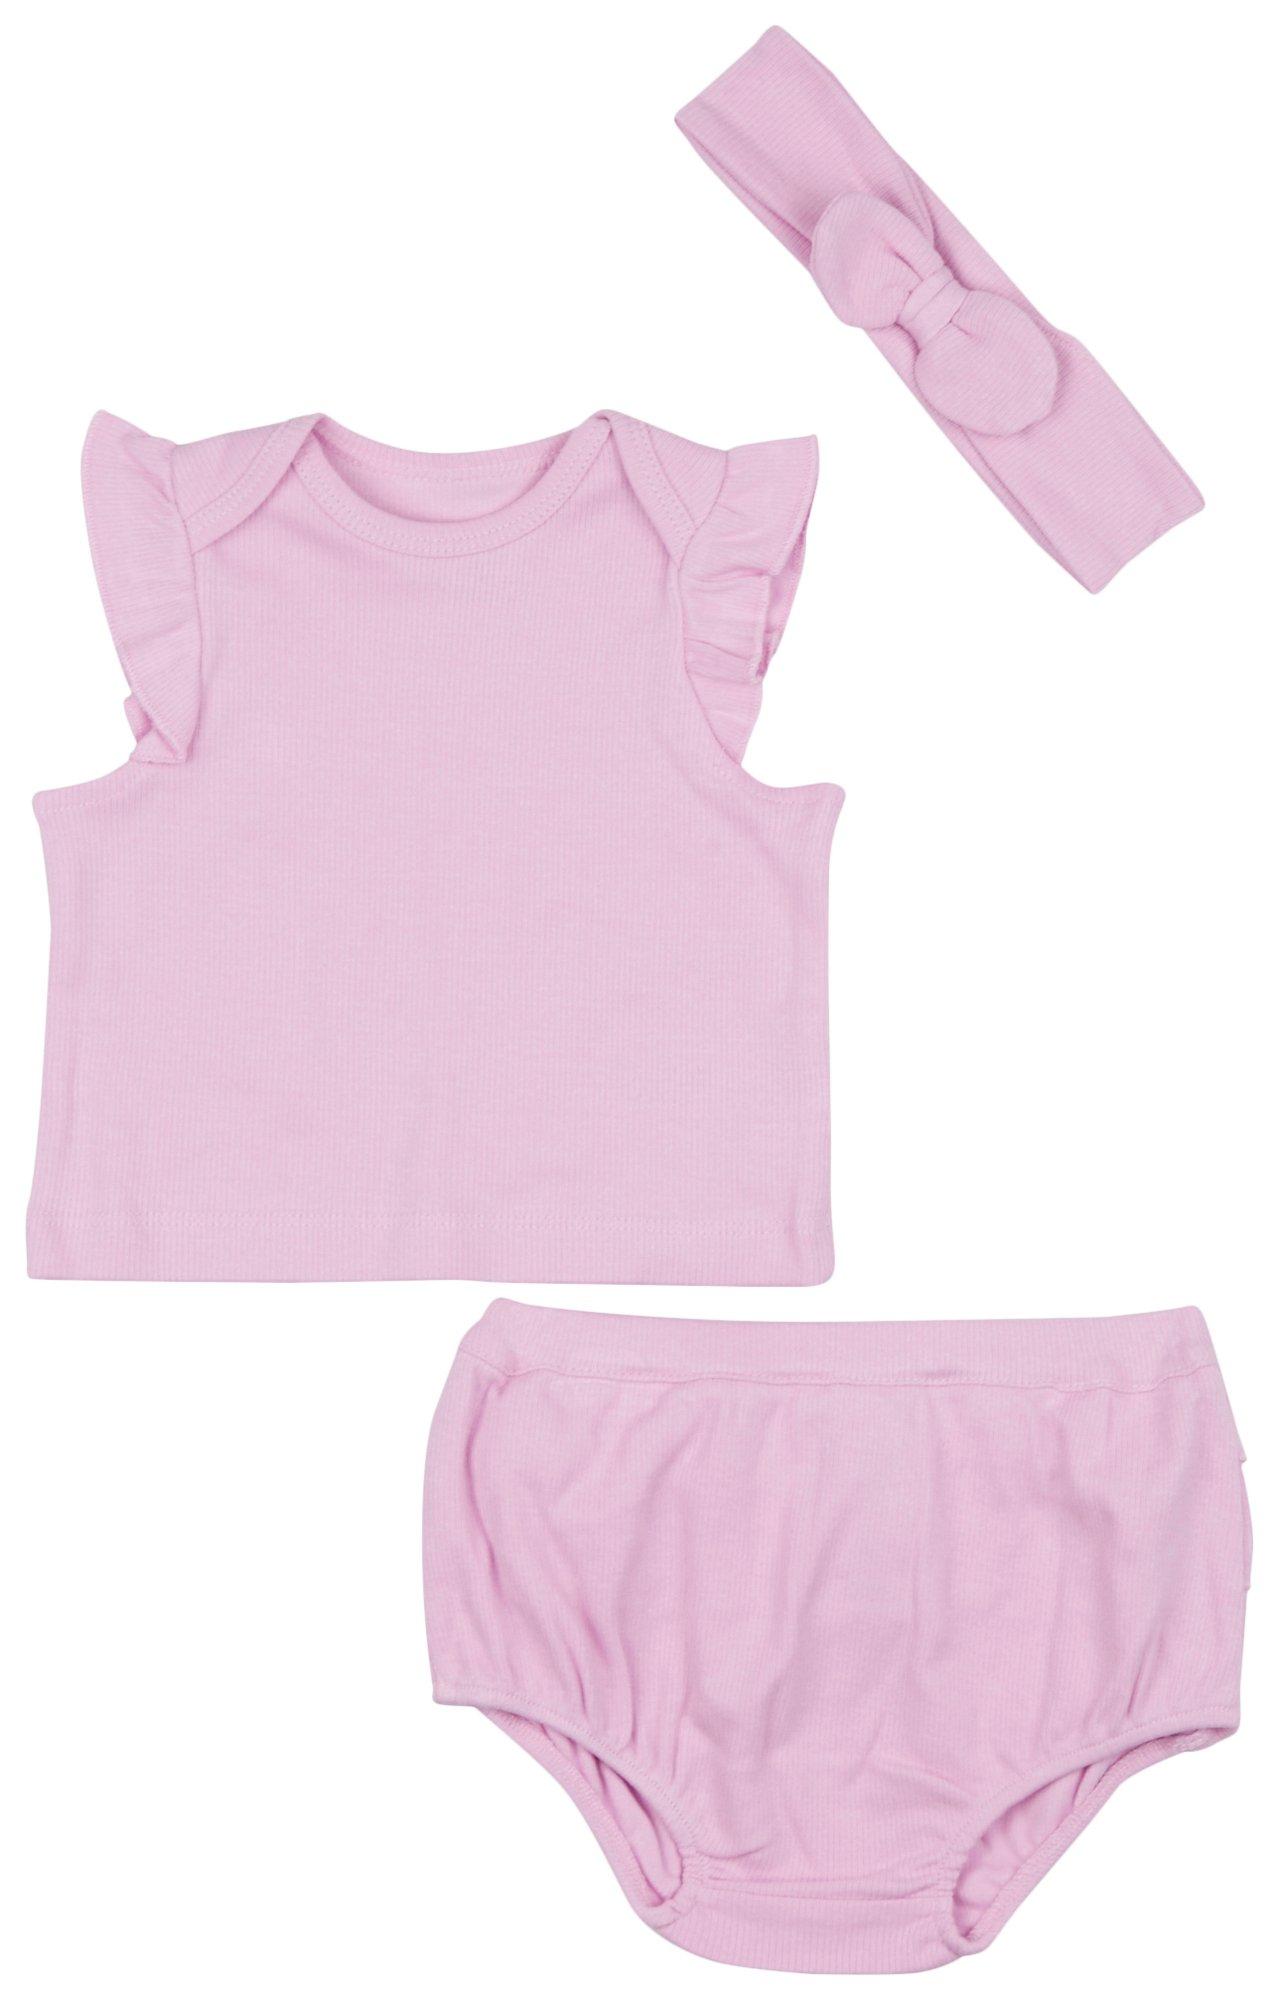 Baby Girls 3-pc. Lilac Knit Top Bloomer Set